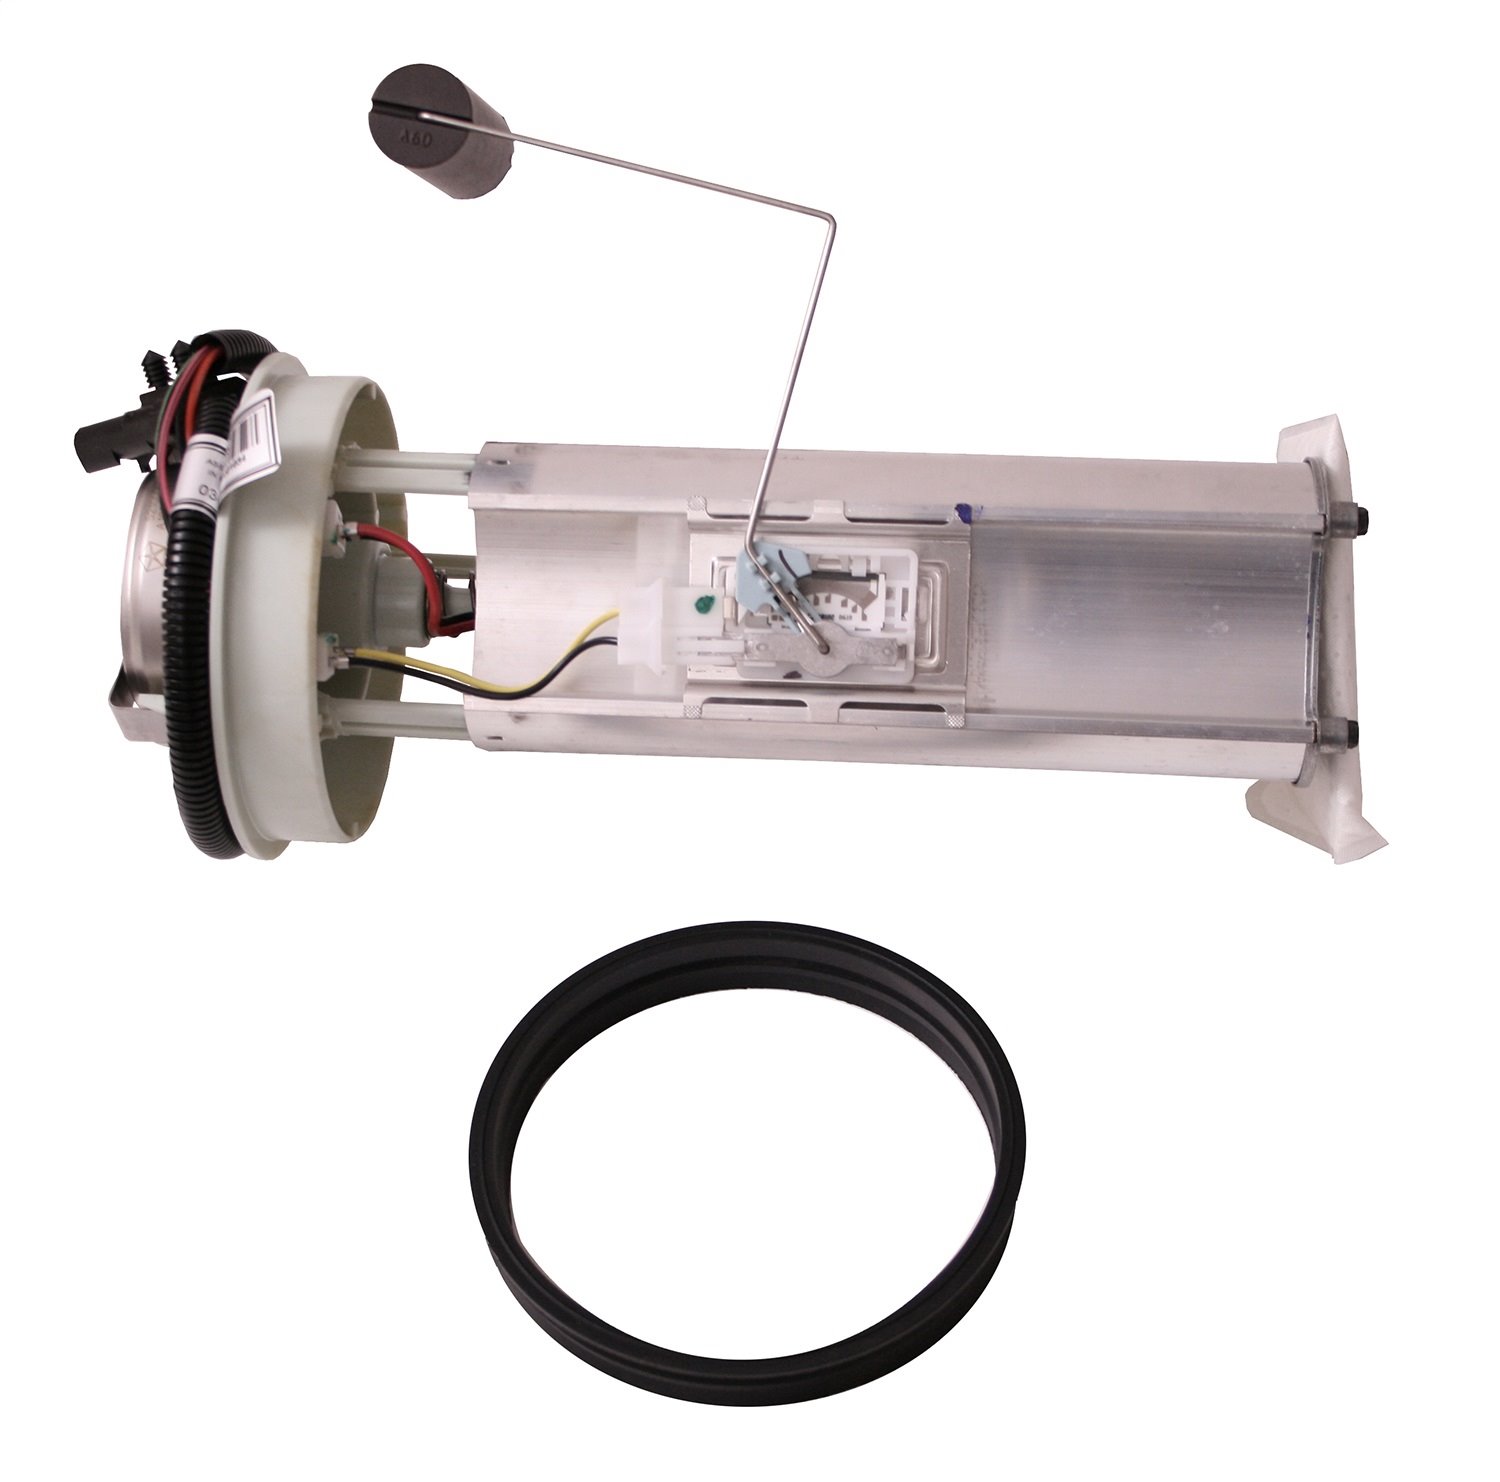 This fuel pump module from Omix-ADA fits 97-98 Jeep Grand Cherokees with a 4.0L or 5.2L engine. Also